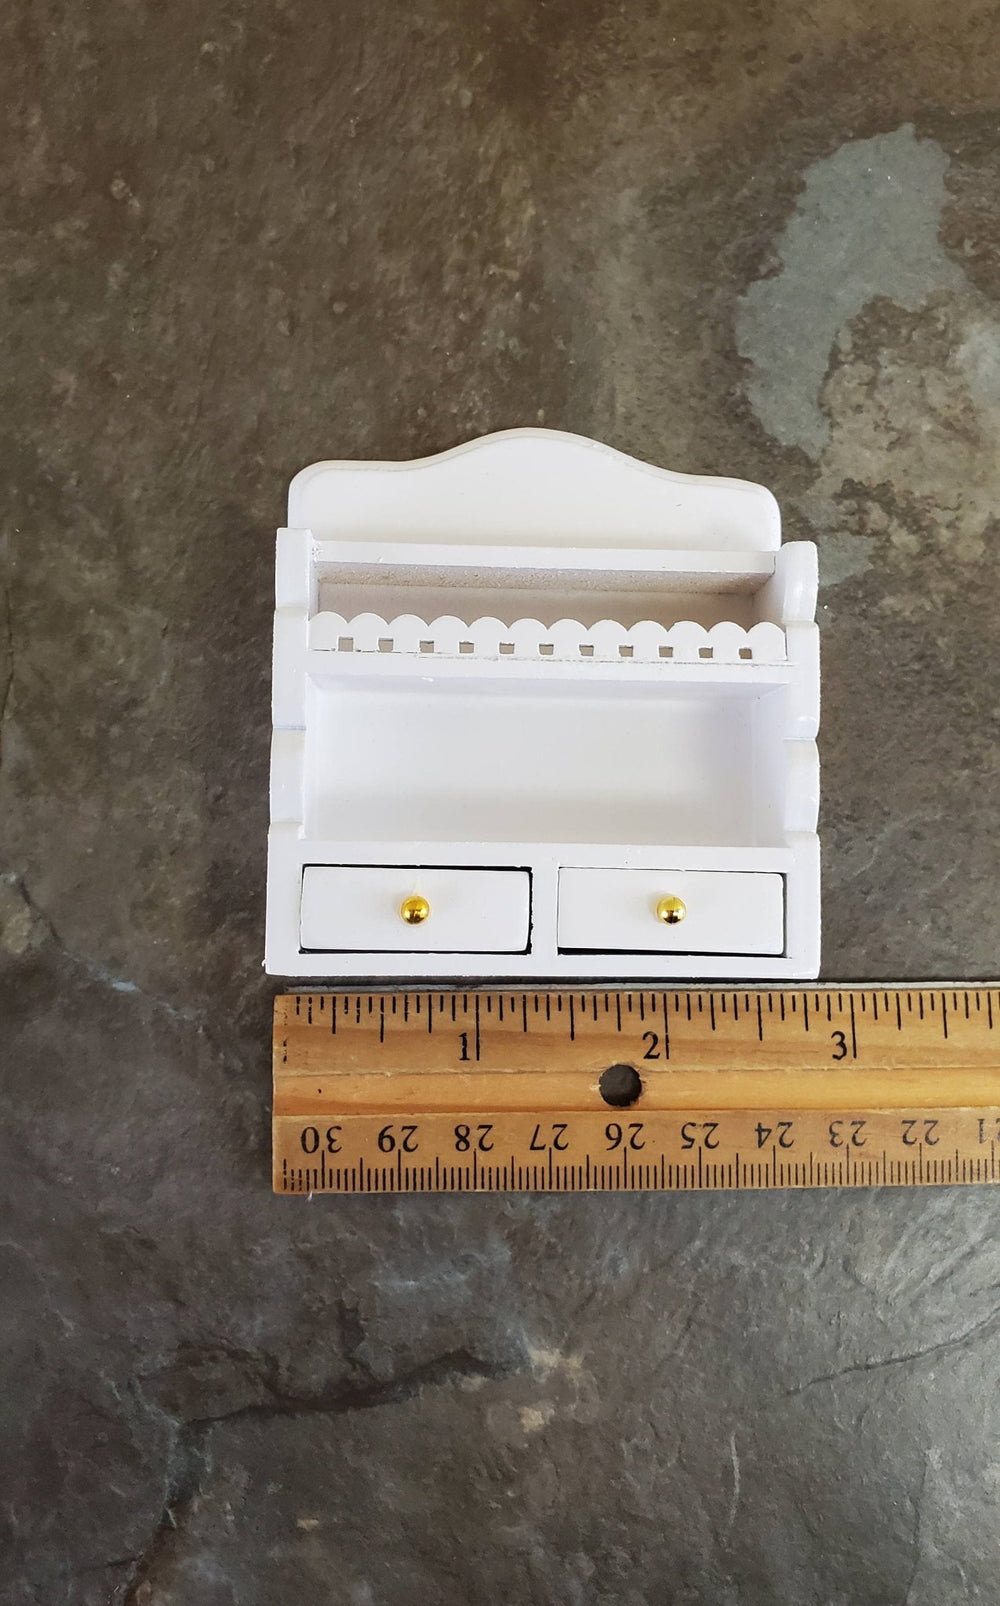 Dollhouse Miniature Hanging Kitchen Shelf White with Drawers 1:12 Scale Furniture - Miniature Crush